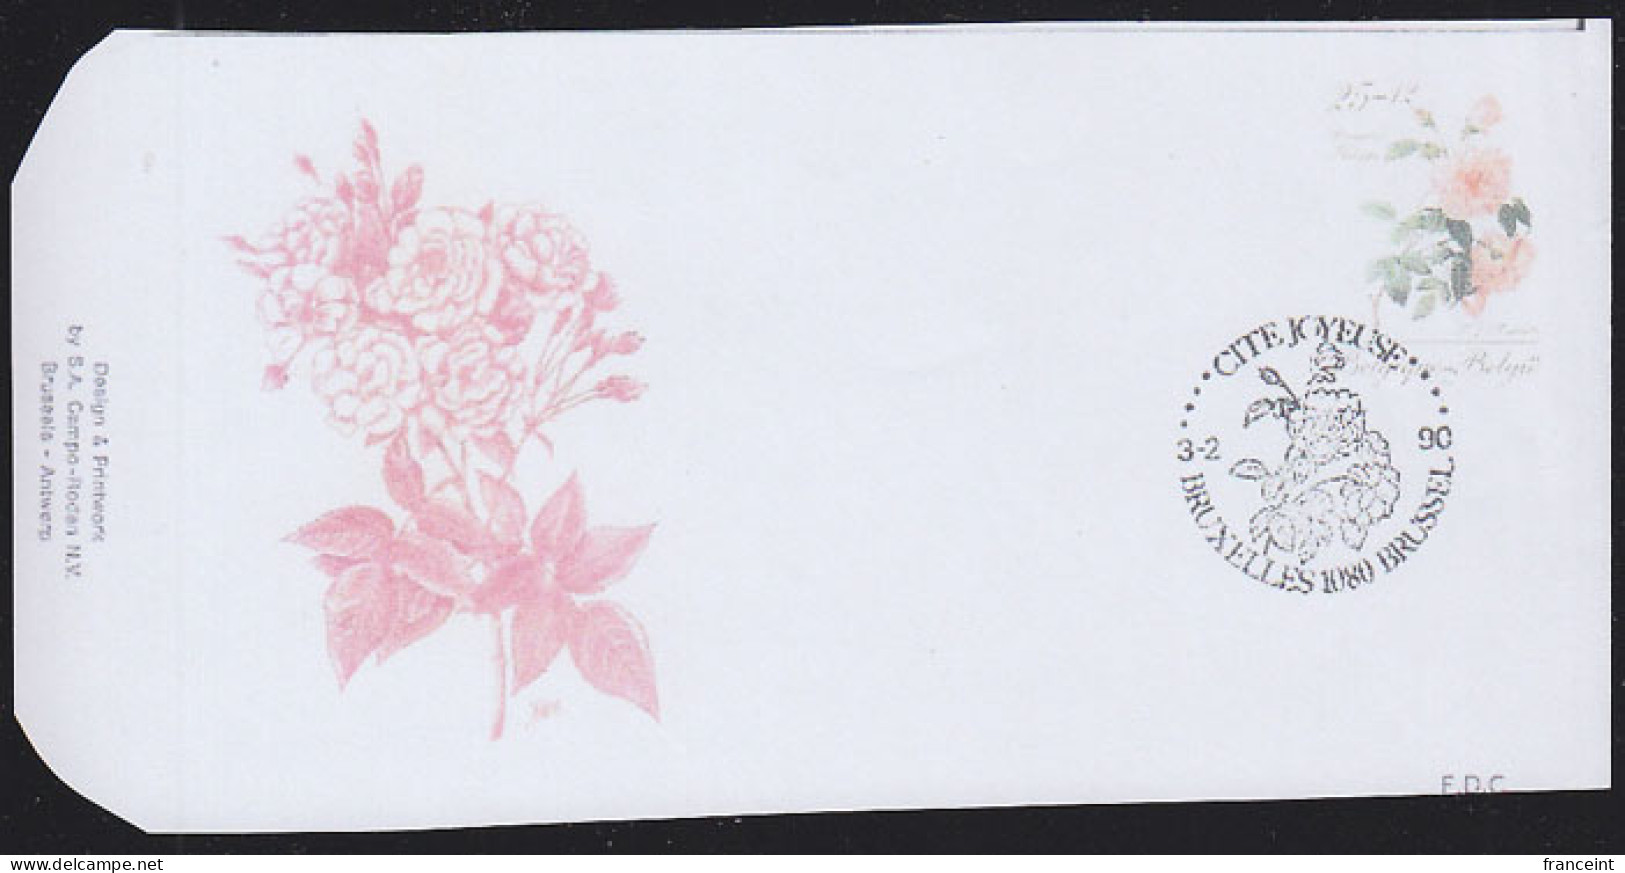 BELGIUM(1990) Bengale Philippe Rose. Die Proof In Red Signed By The Engraver, Representing The Cachet For FDC. Sc B1090 - Proofs & Reprints